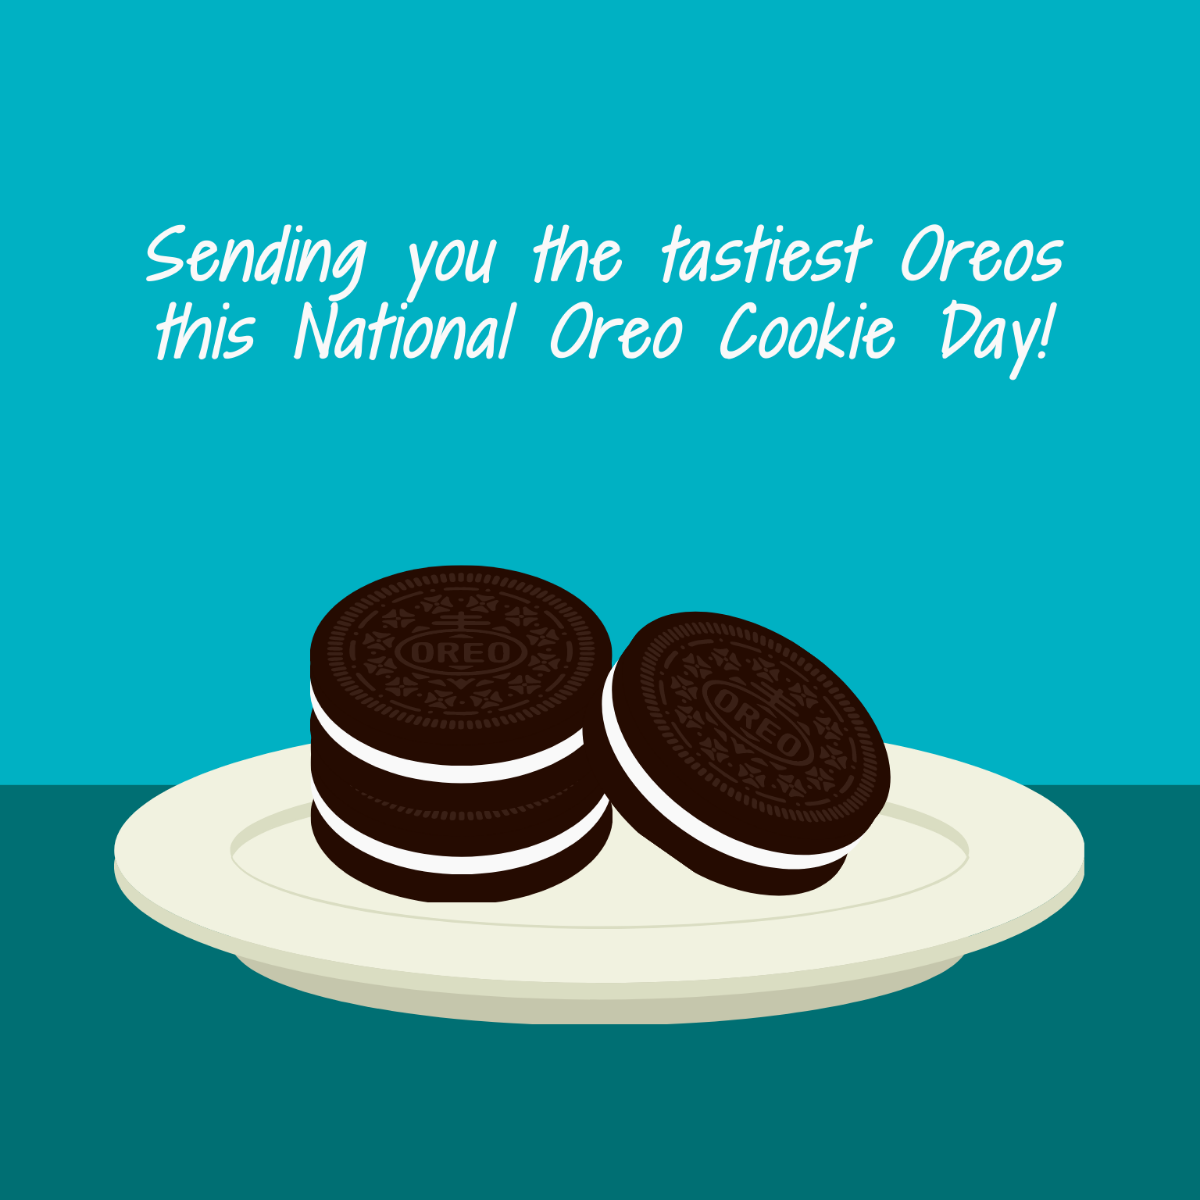 National Oreo Cookie Day Greeting Card Vector